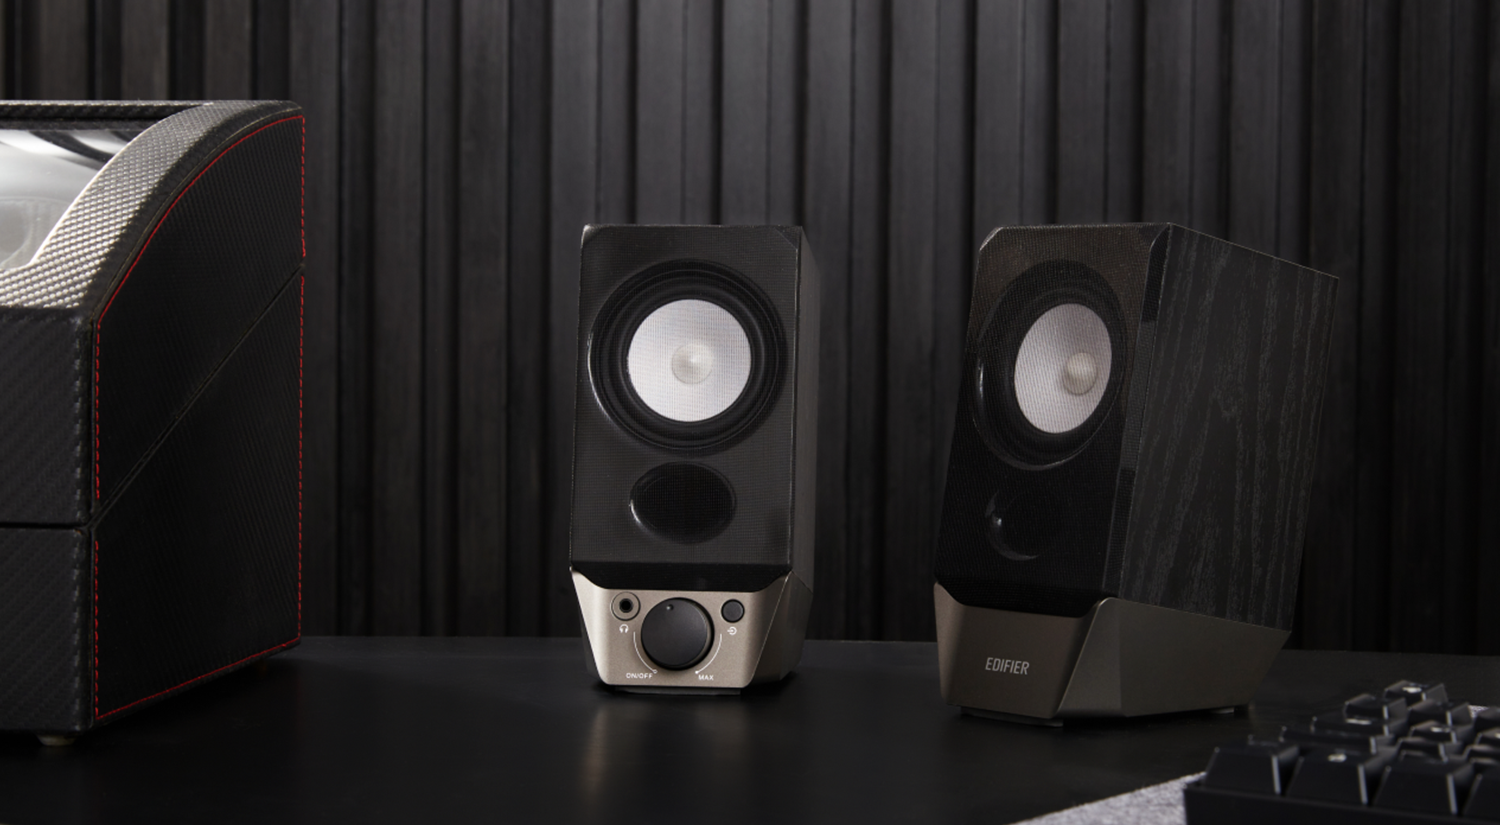 A large marketing image providing additional information about the product Edifier R19BT - USB Stereo Speakers (Black) - Additional alt info not provided